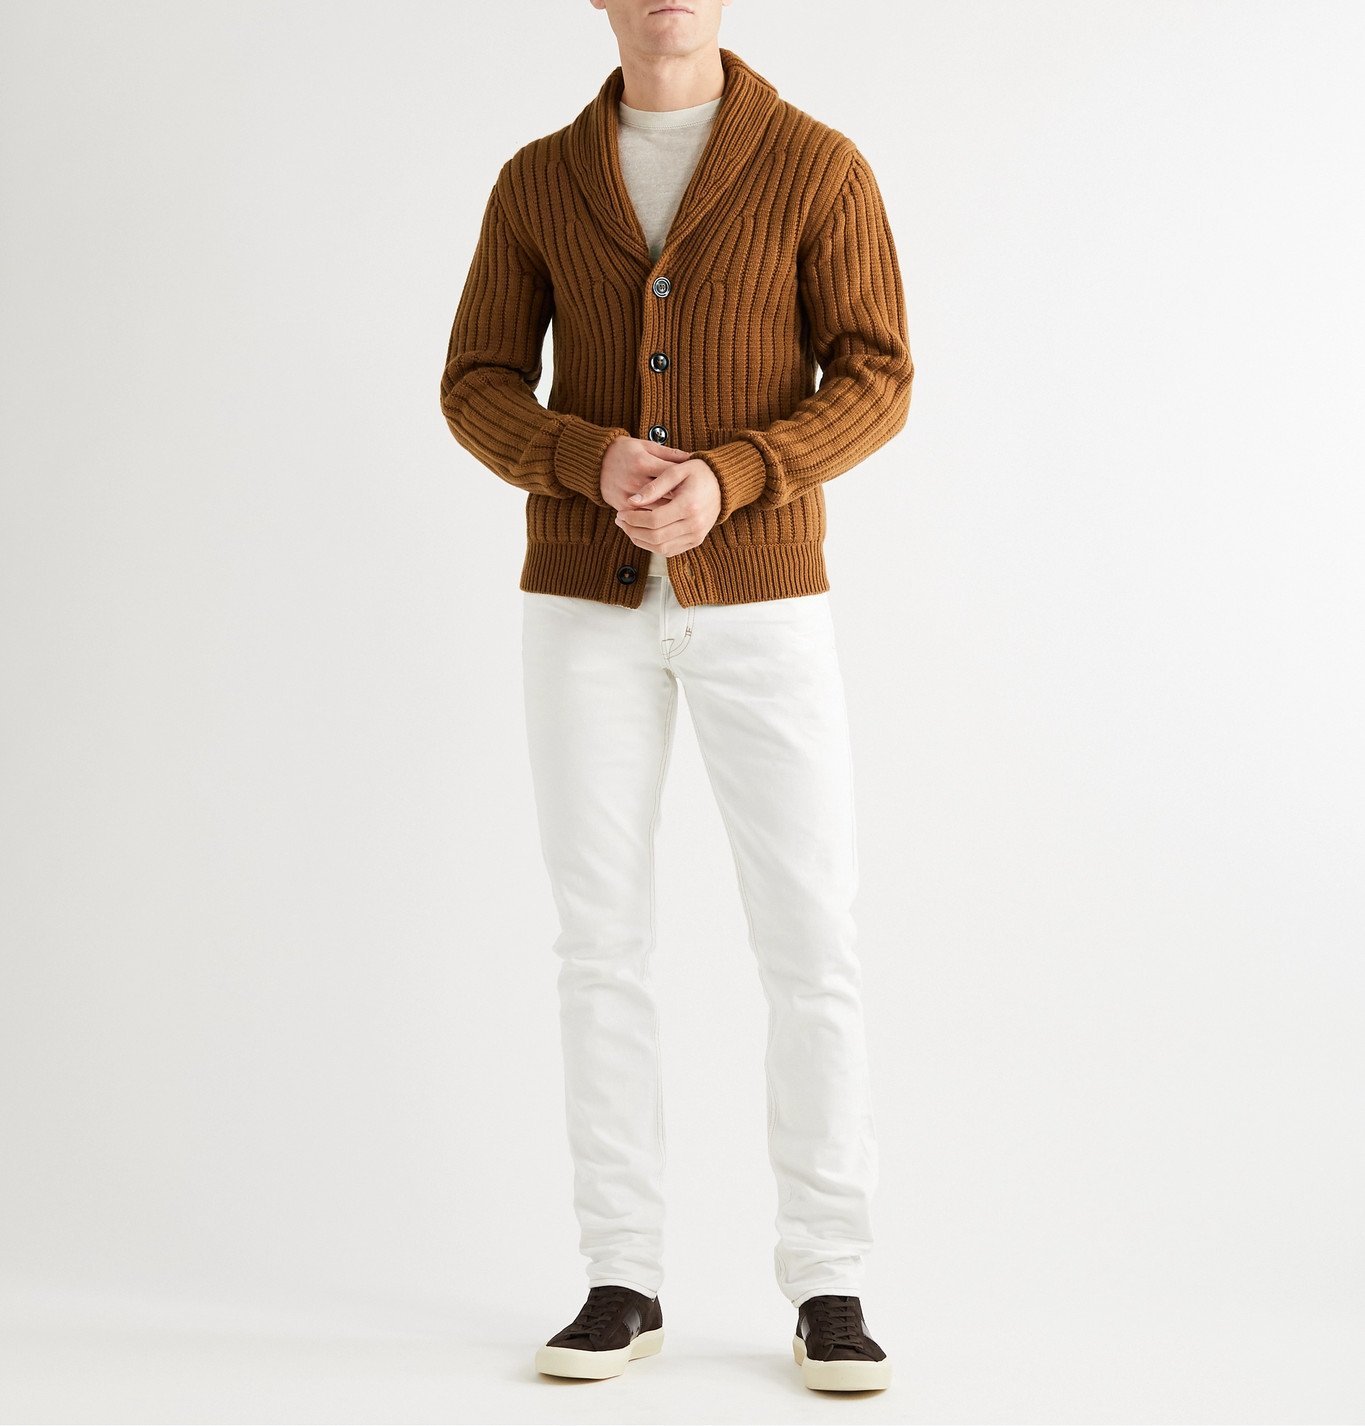 TOM FORD - Shawl-Collar Ribbed Cashmere Cardigan - Brown TOM FORD